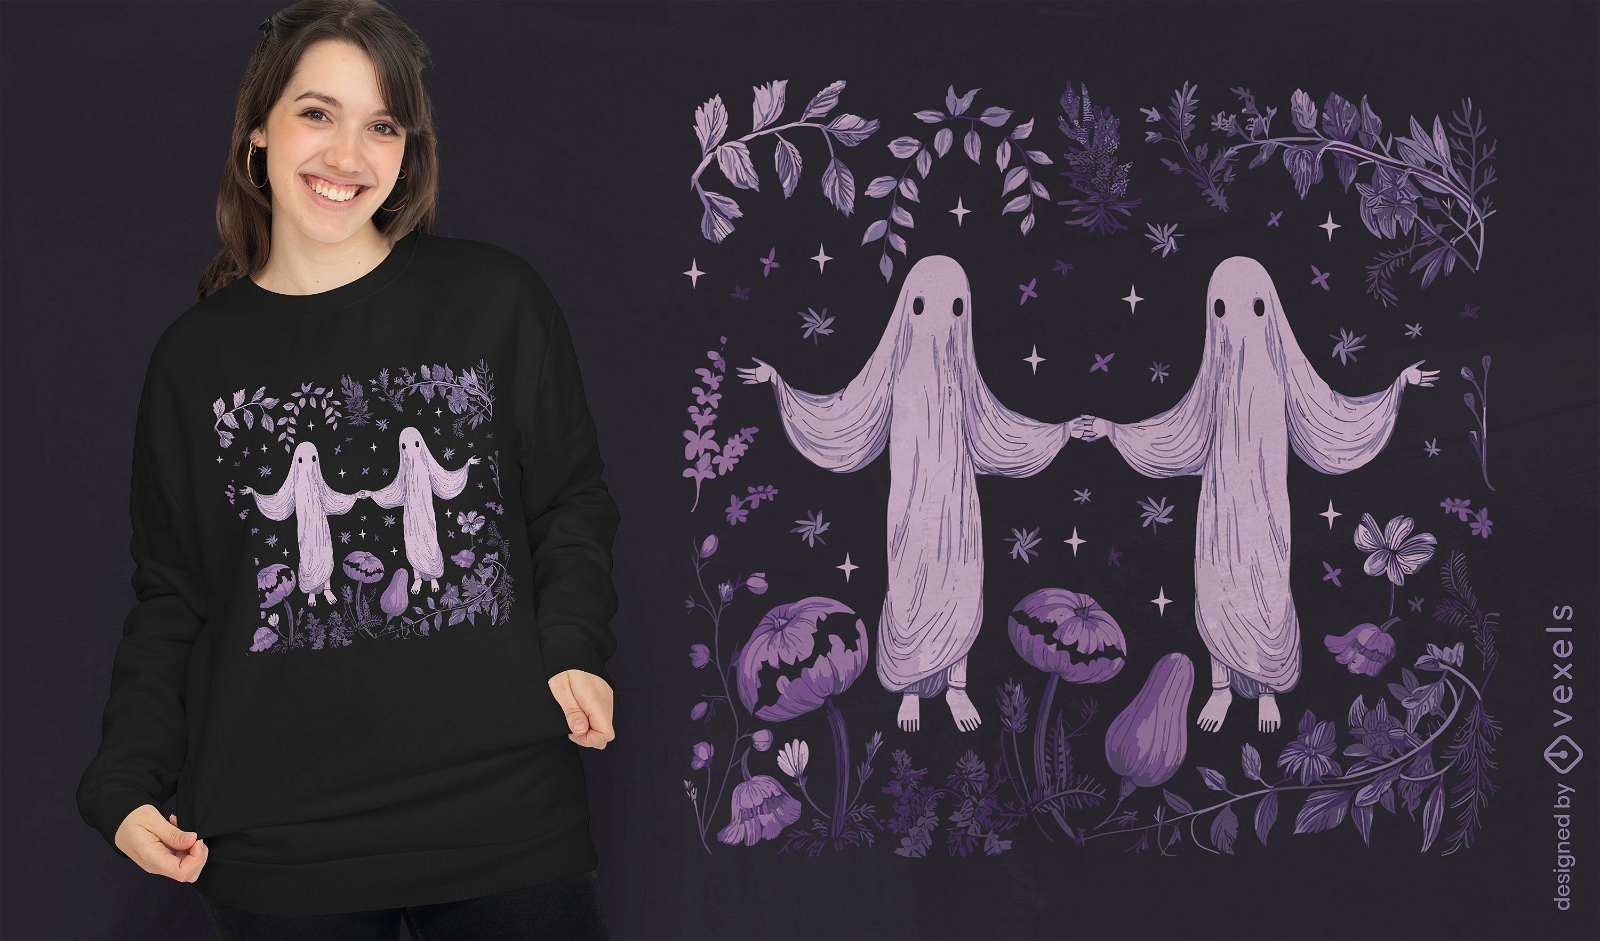 Creepy ghosts in nature t-shirt design